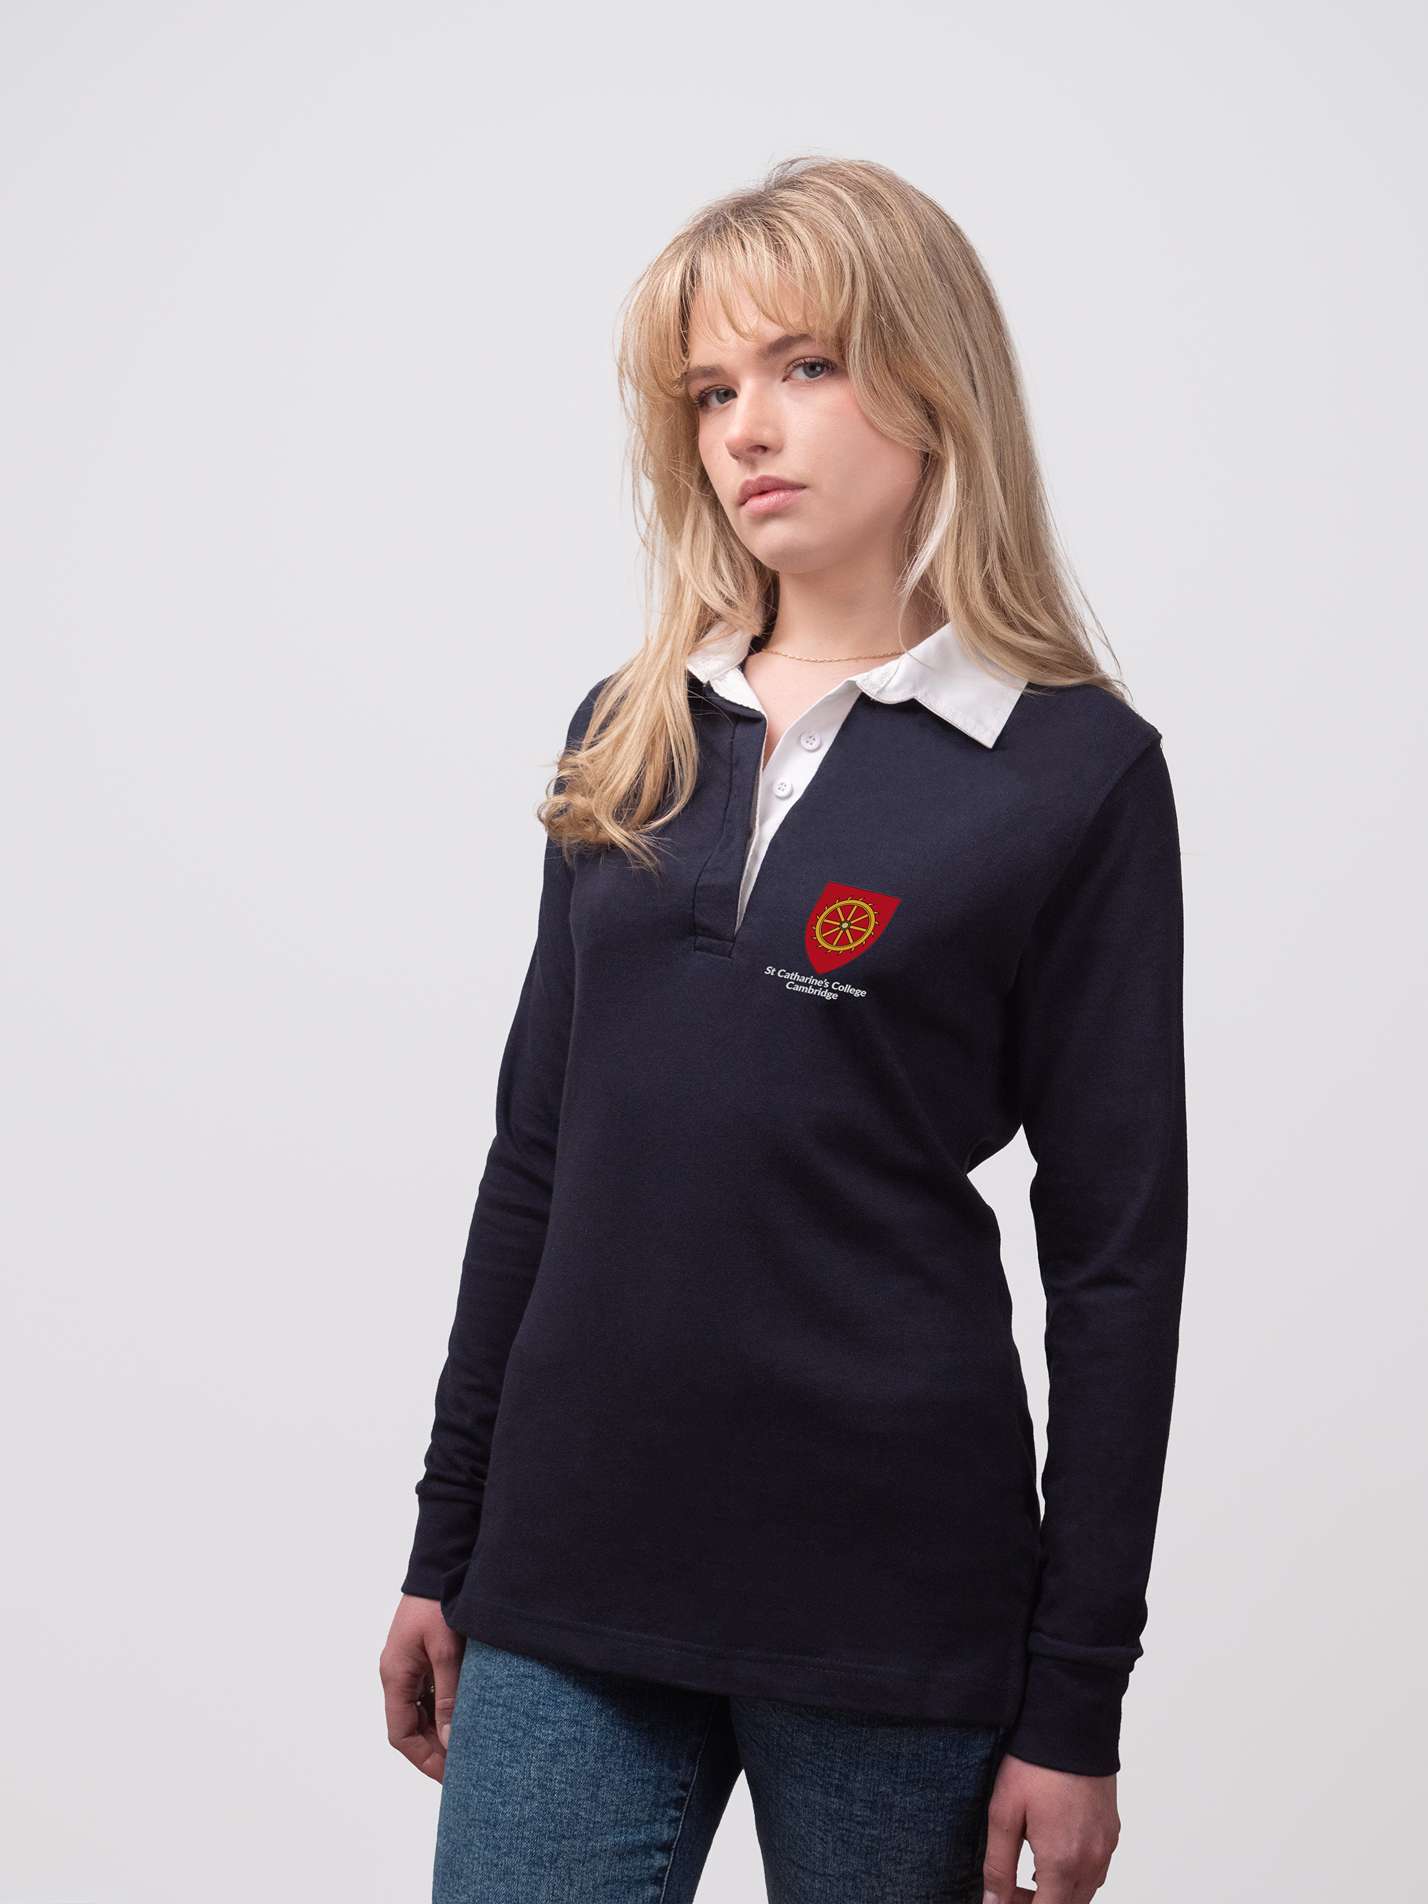 Student wearing a navy St Catharine's College rugby shirt with embroidered crest